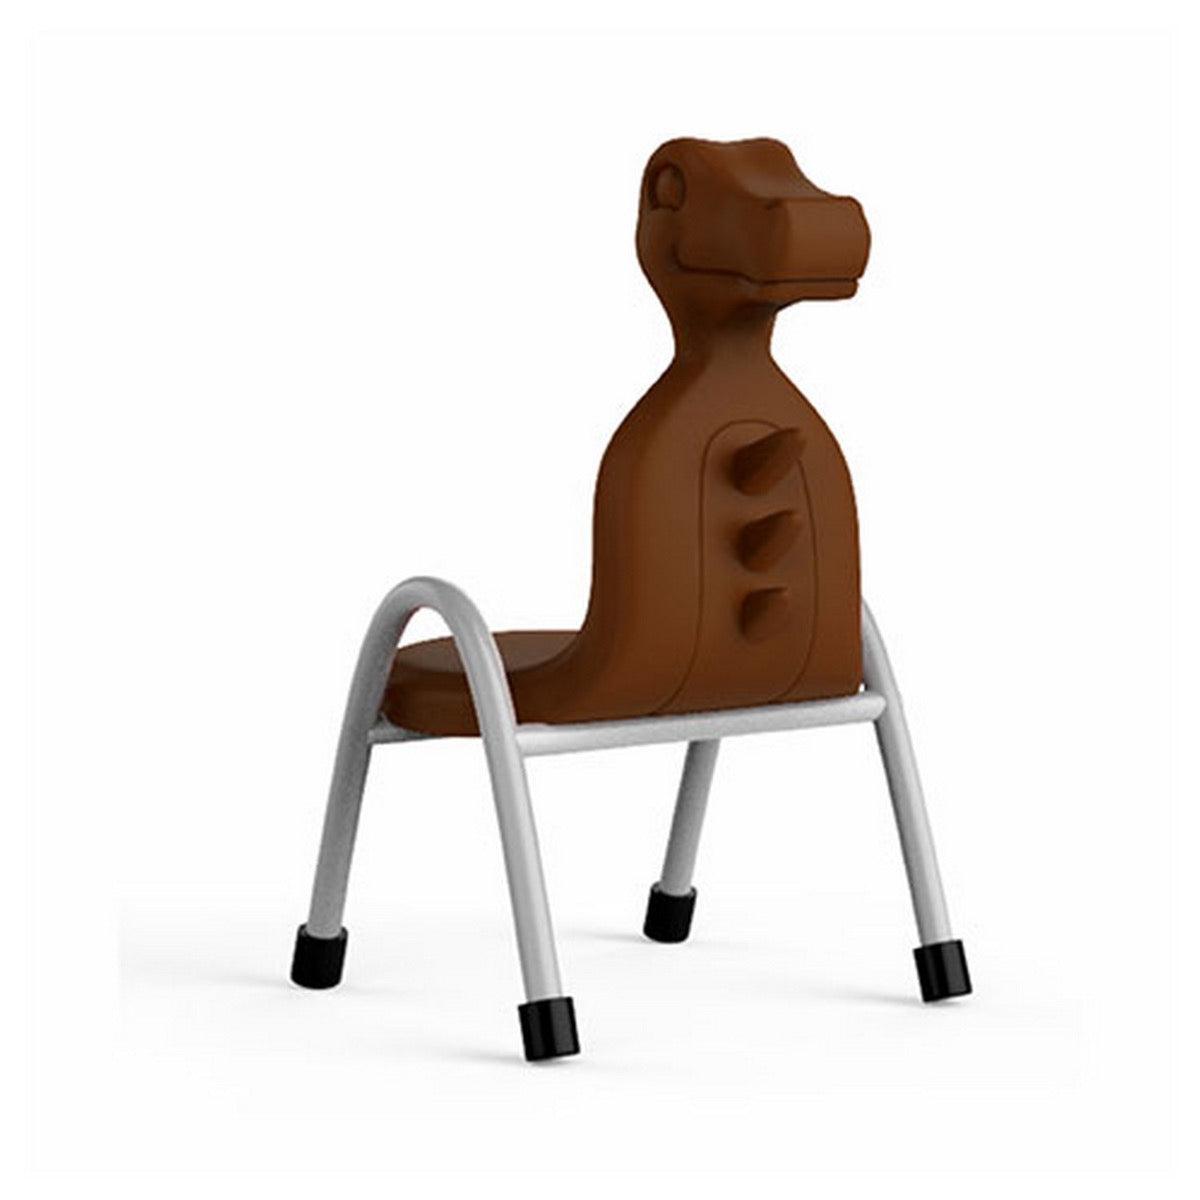 Ok Play Dino Chair, Study Chair, Sturdy And Durable Chair, Plastic Chair, Perfect For Home, Creches And School, Brown, 5 to 10 Years, Height 10 Inches